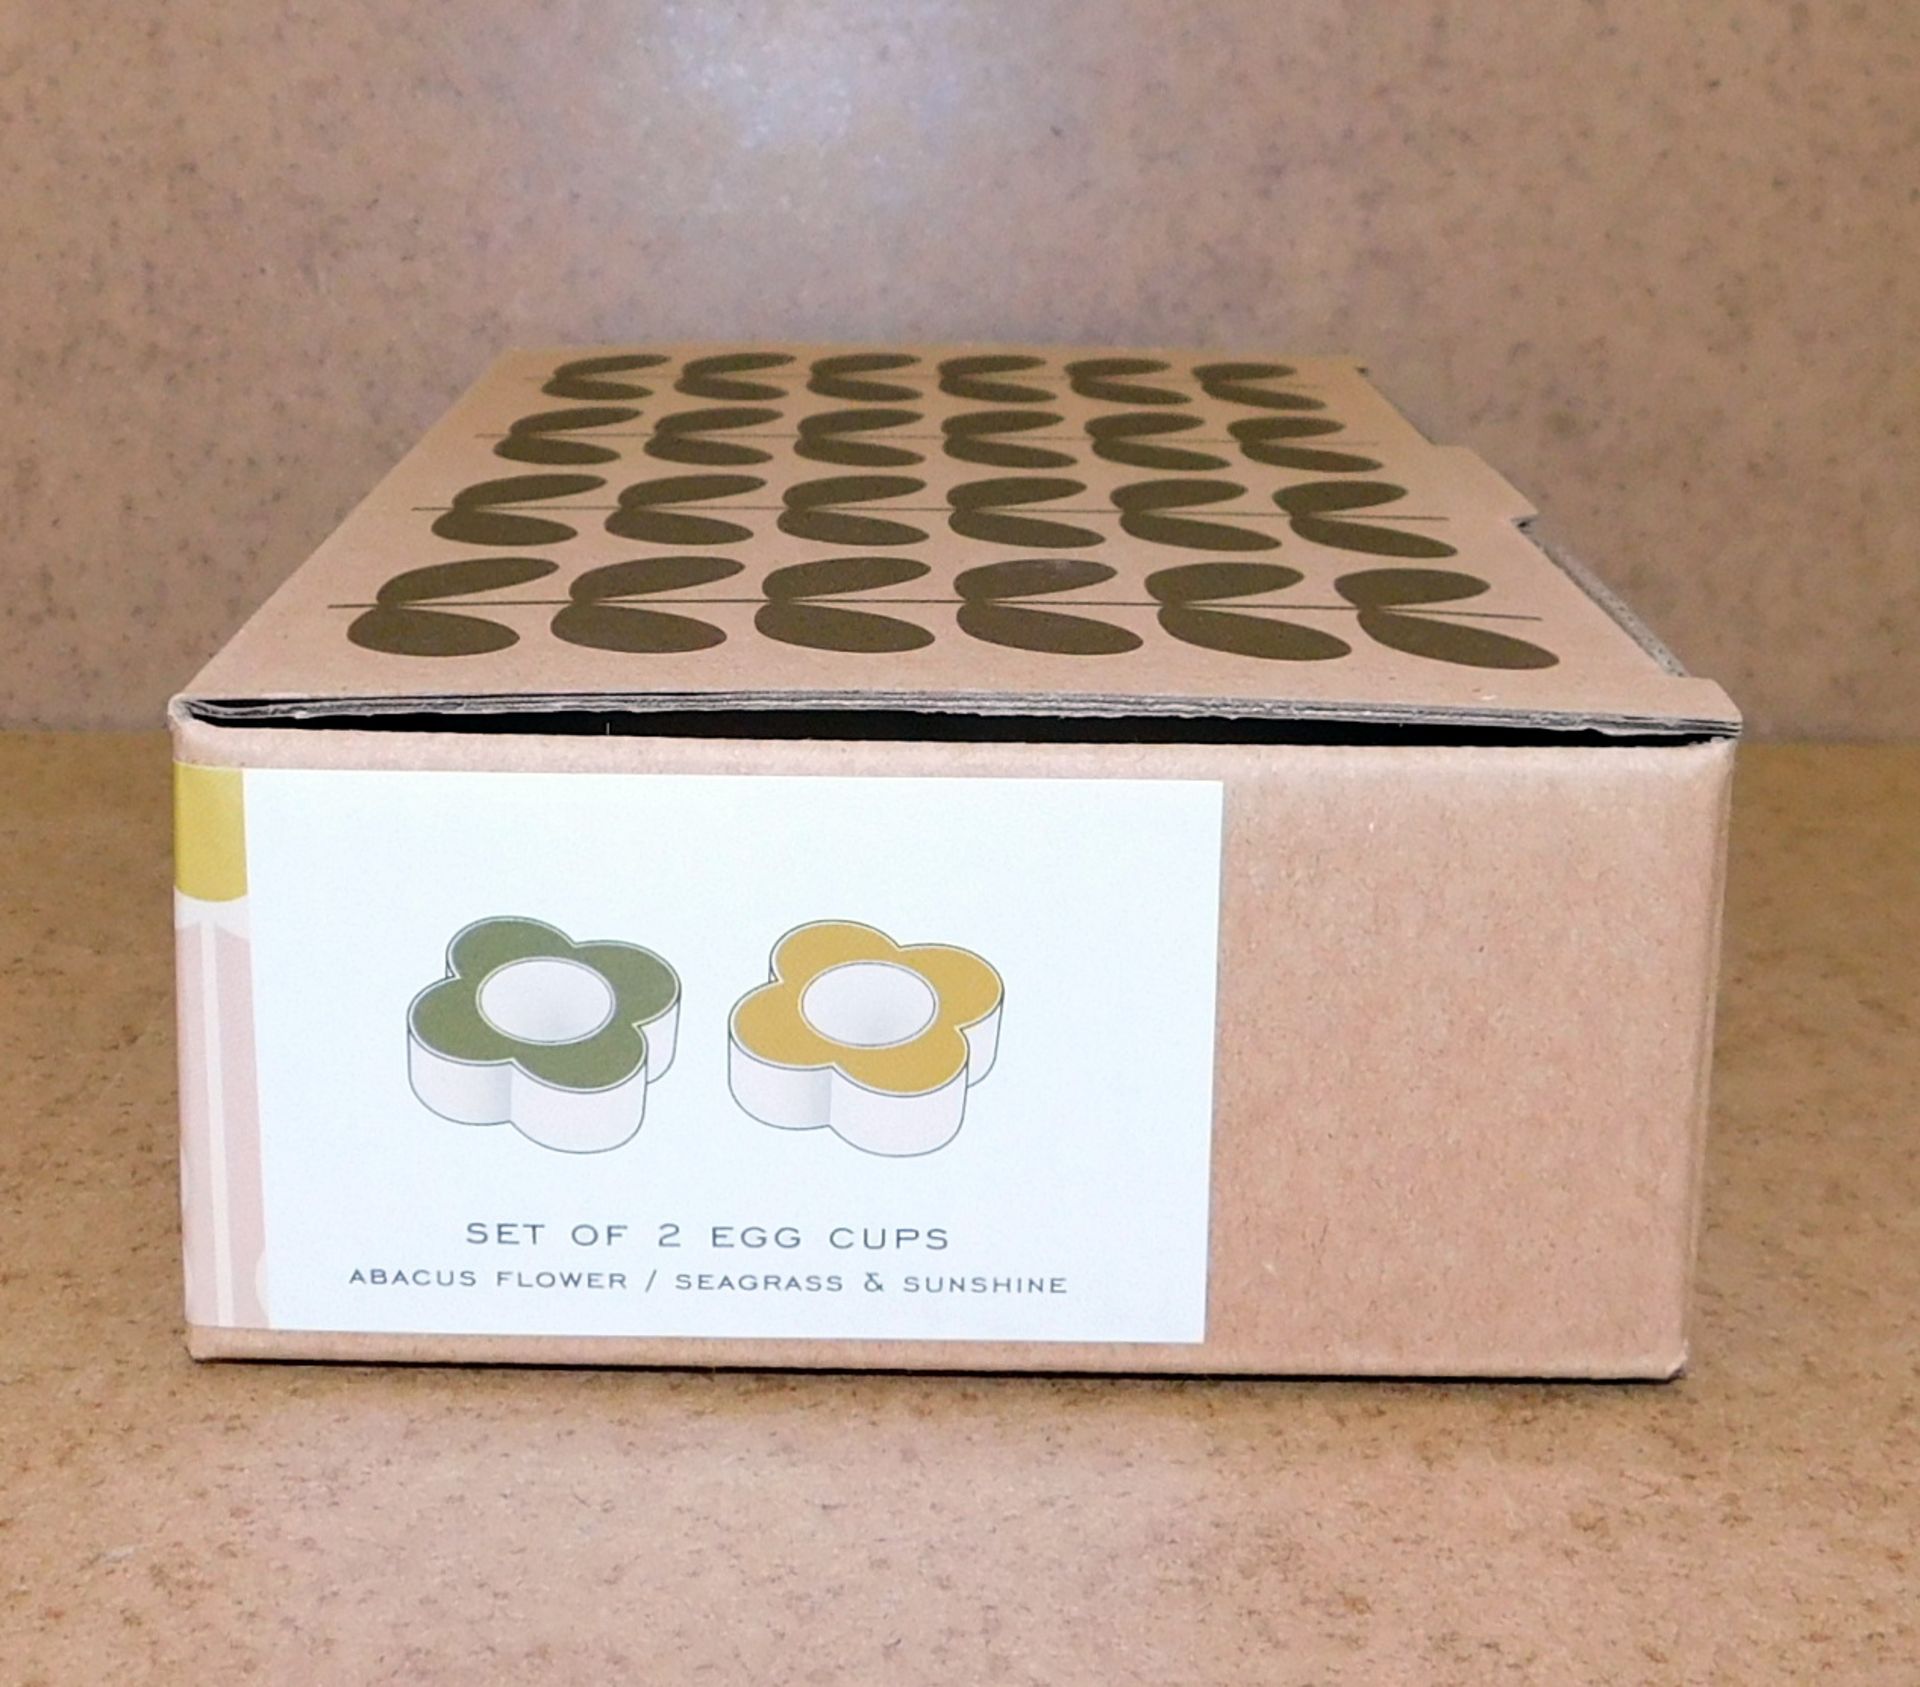 6 Orla Kiely Set of 2 Egg Cups, Abacus Flower, Sunshine & Seagrass (RRP £20 per set) - Image 2 of 2